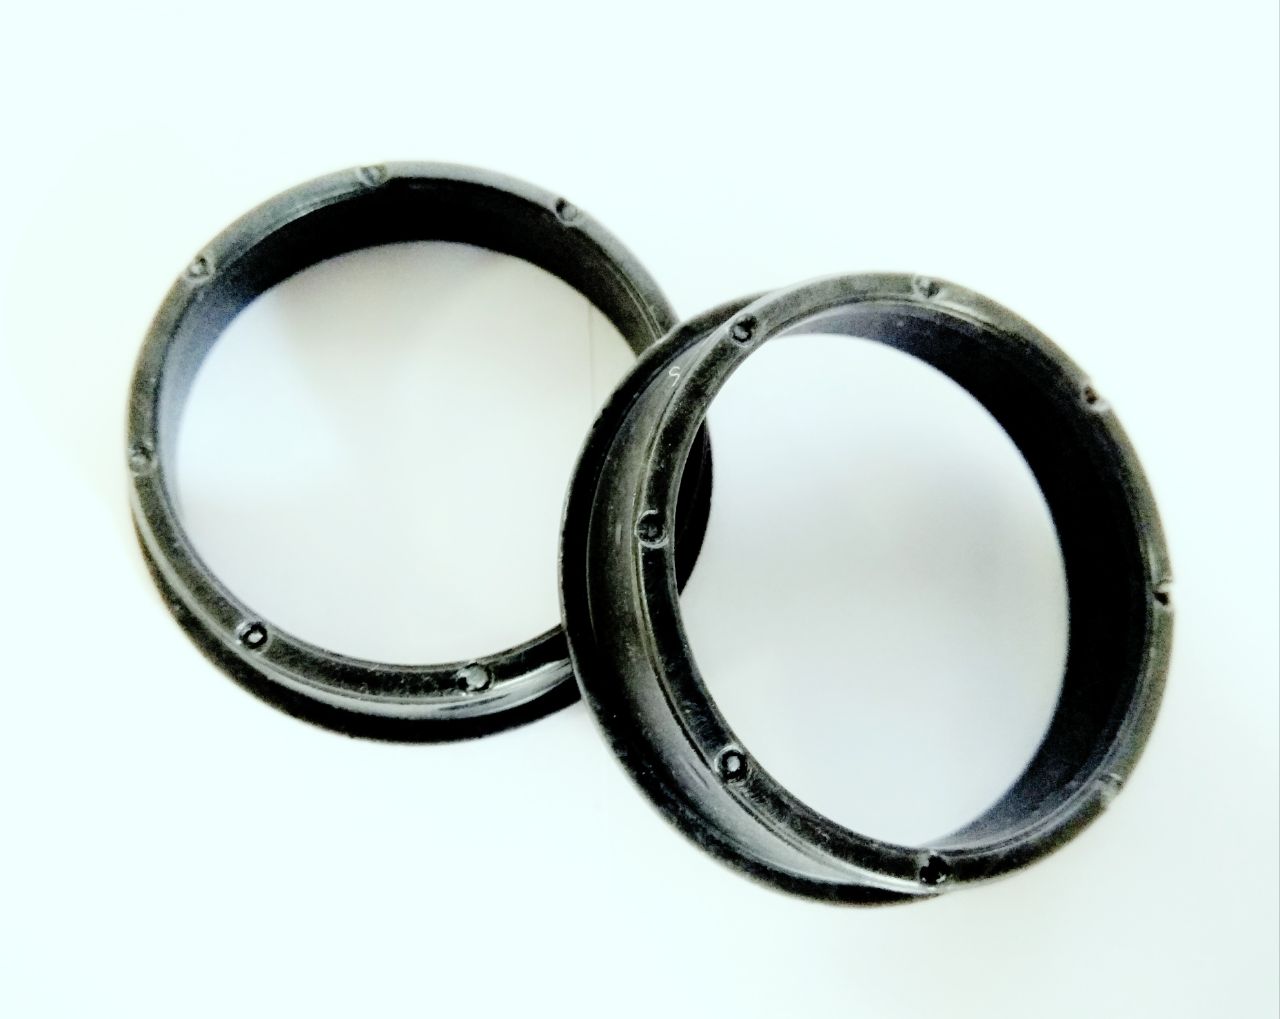 CRK SBC Road Press In Plastic Bb Bearing Cups For Carbon Frames 2 Pcs/Pair